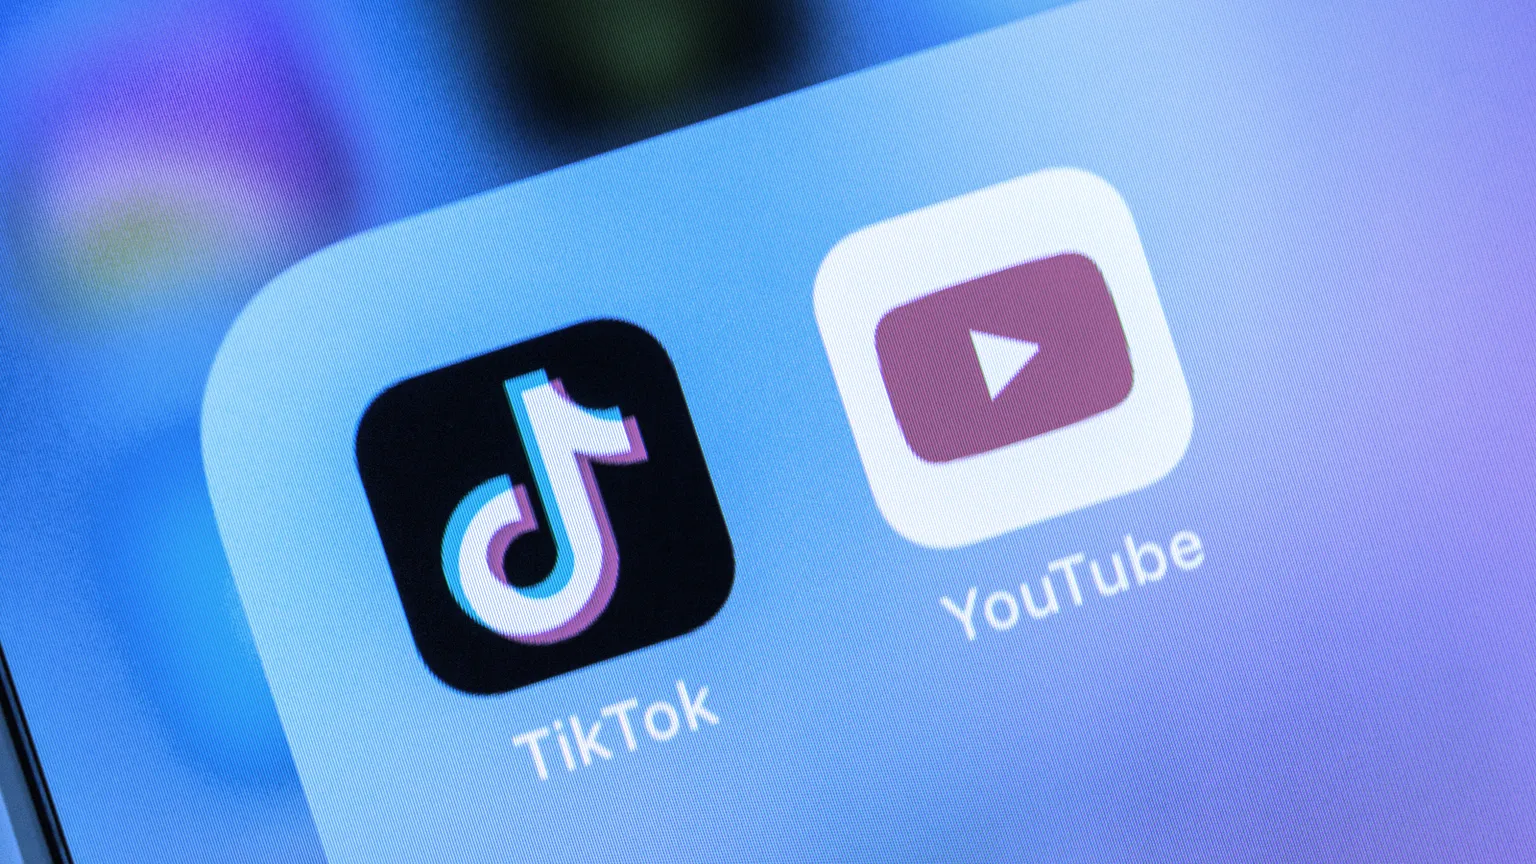 YouTube and TikTok have become popular platforms for crypto enthusiasts. Image: Shutterstock